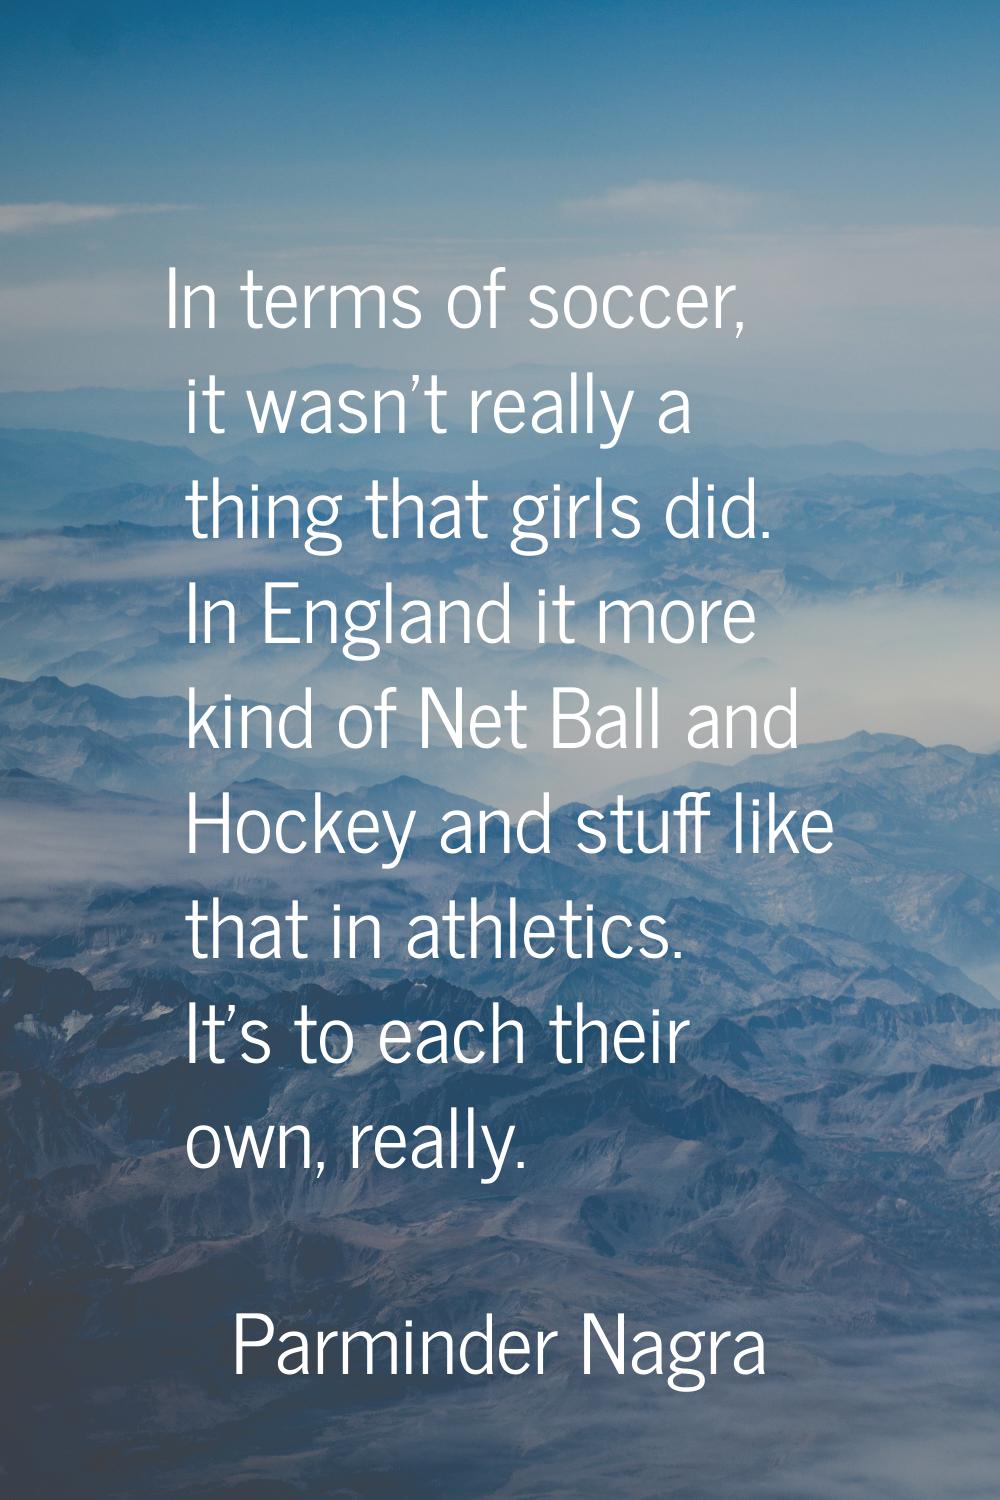 In terms of soccer, it wasn't really a thing that girls did. In England it more kind of Net Ball an